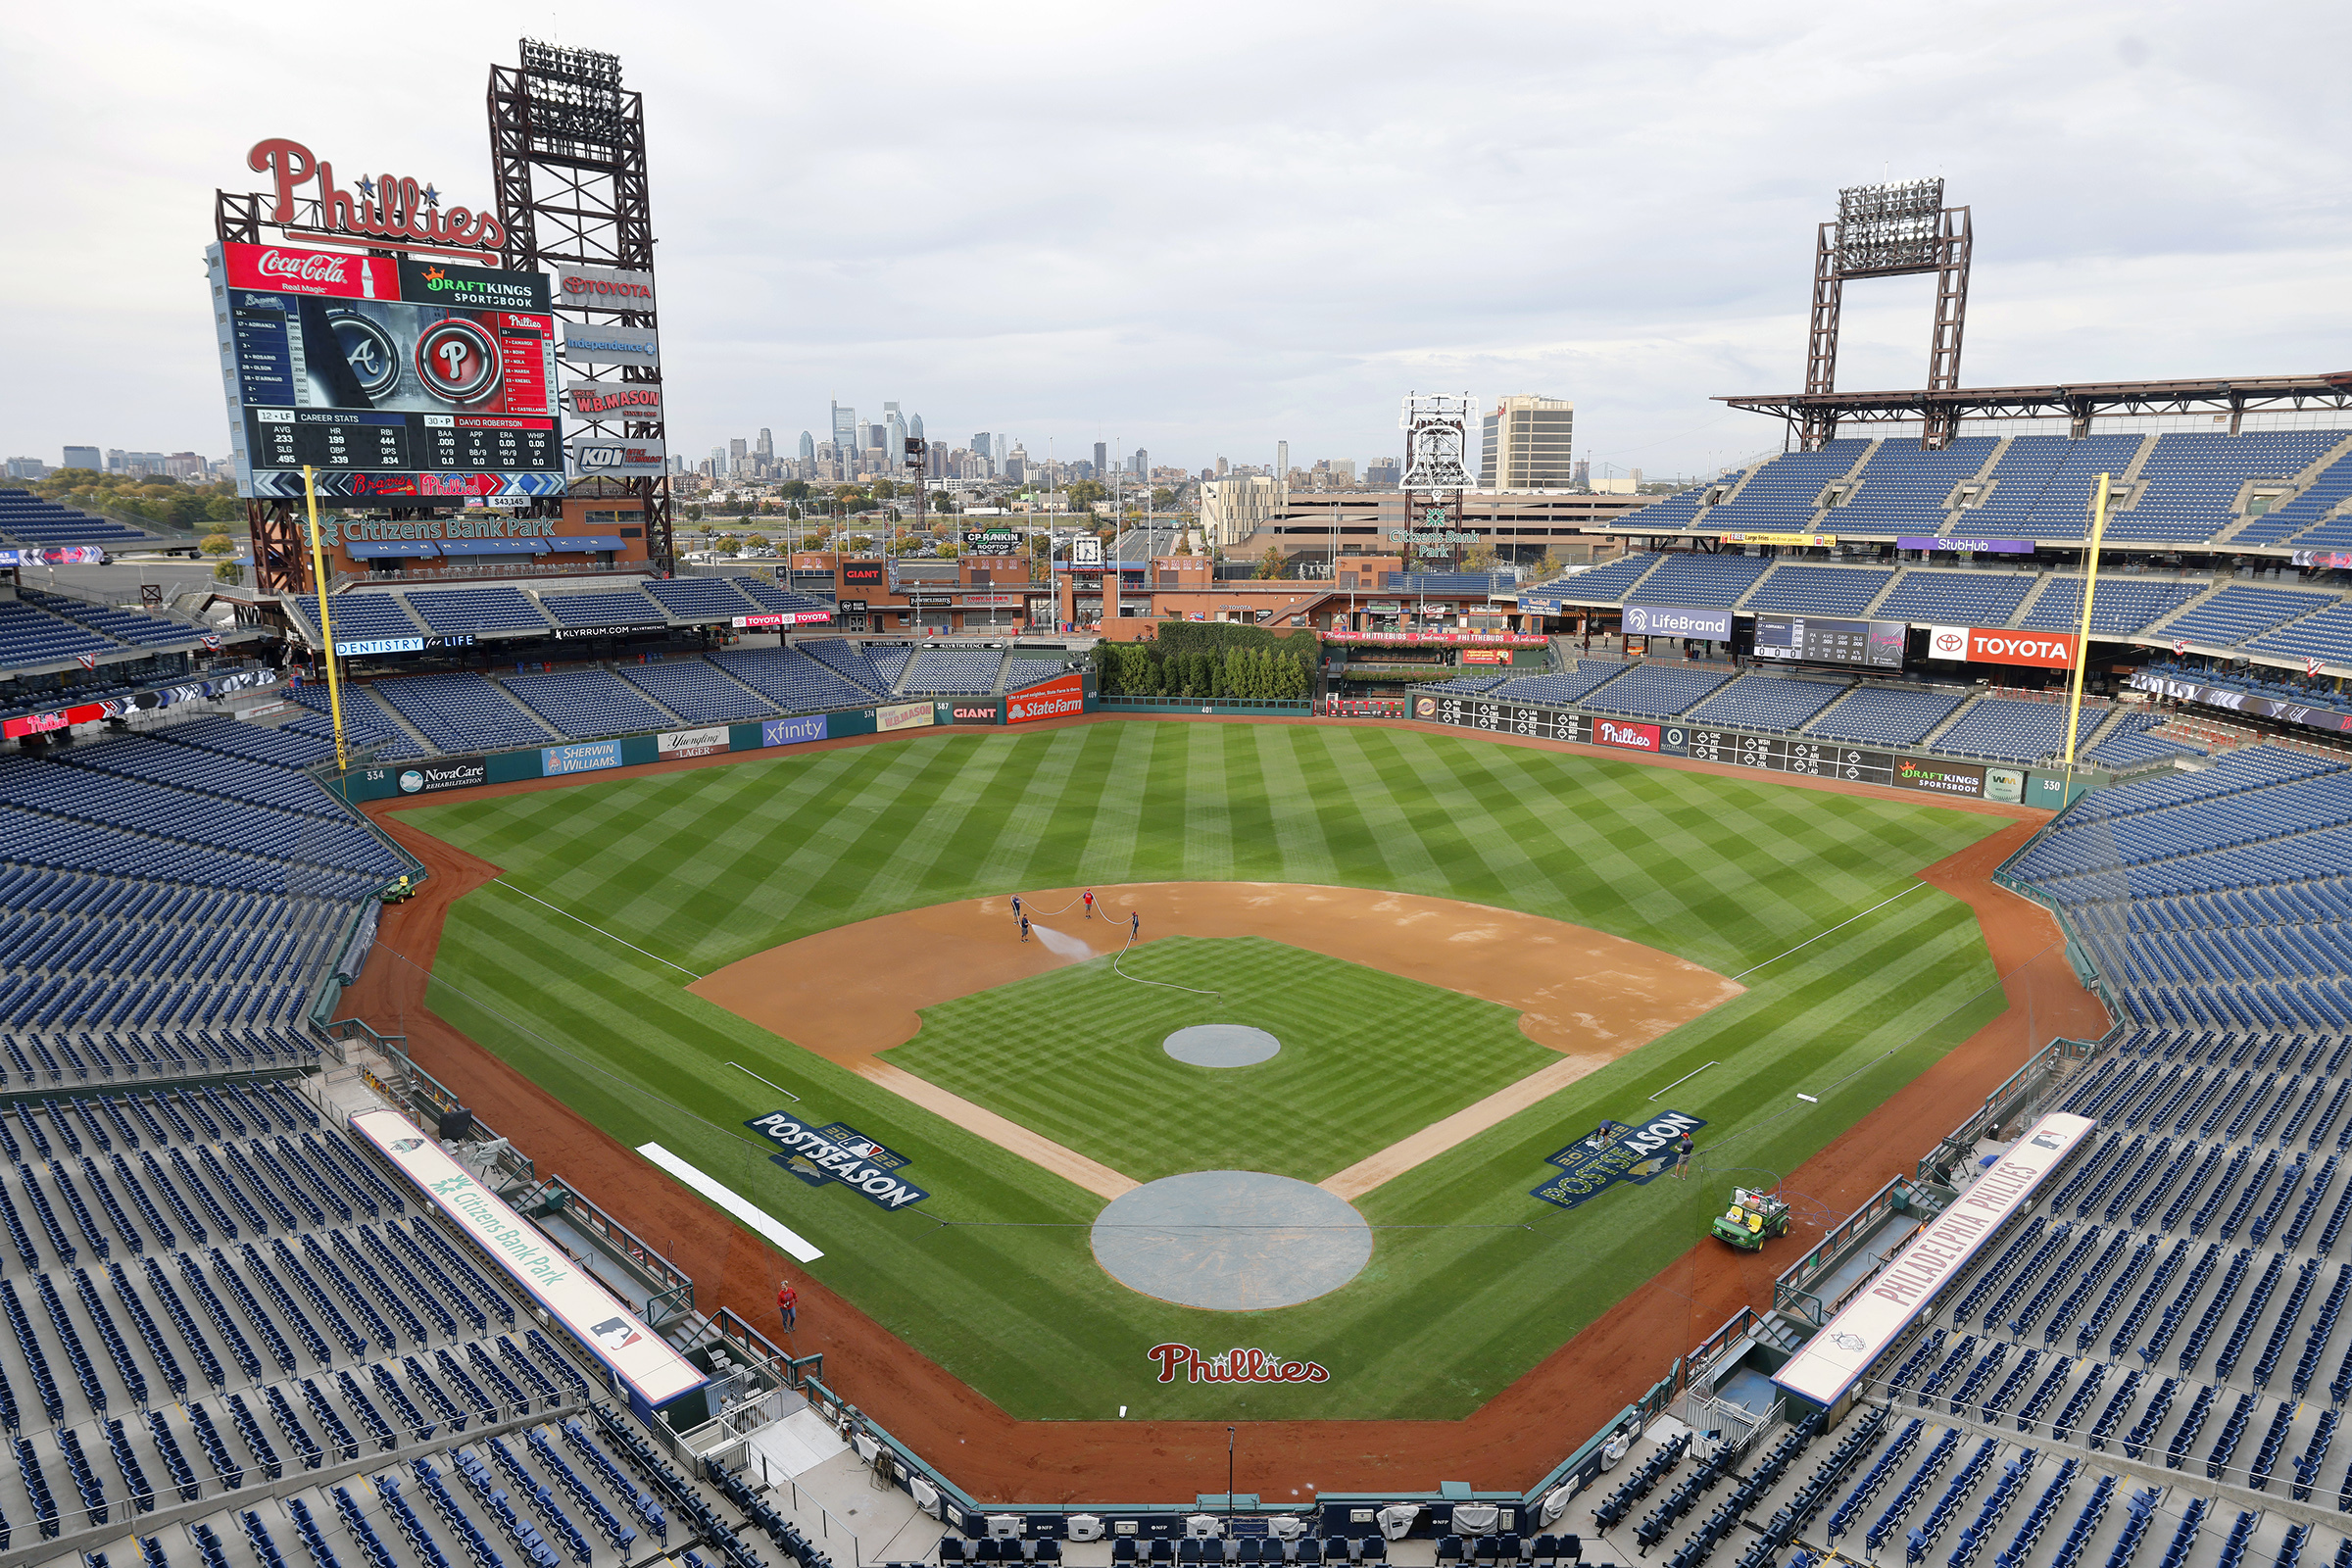 Phillies-Braves Game 3 how to watch and stream the MLB playoffs